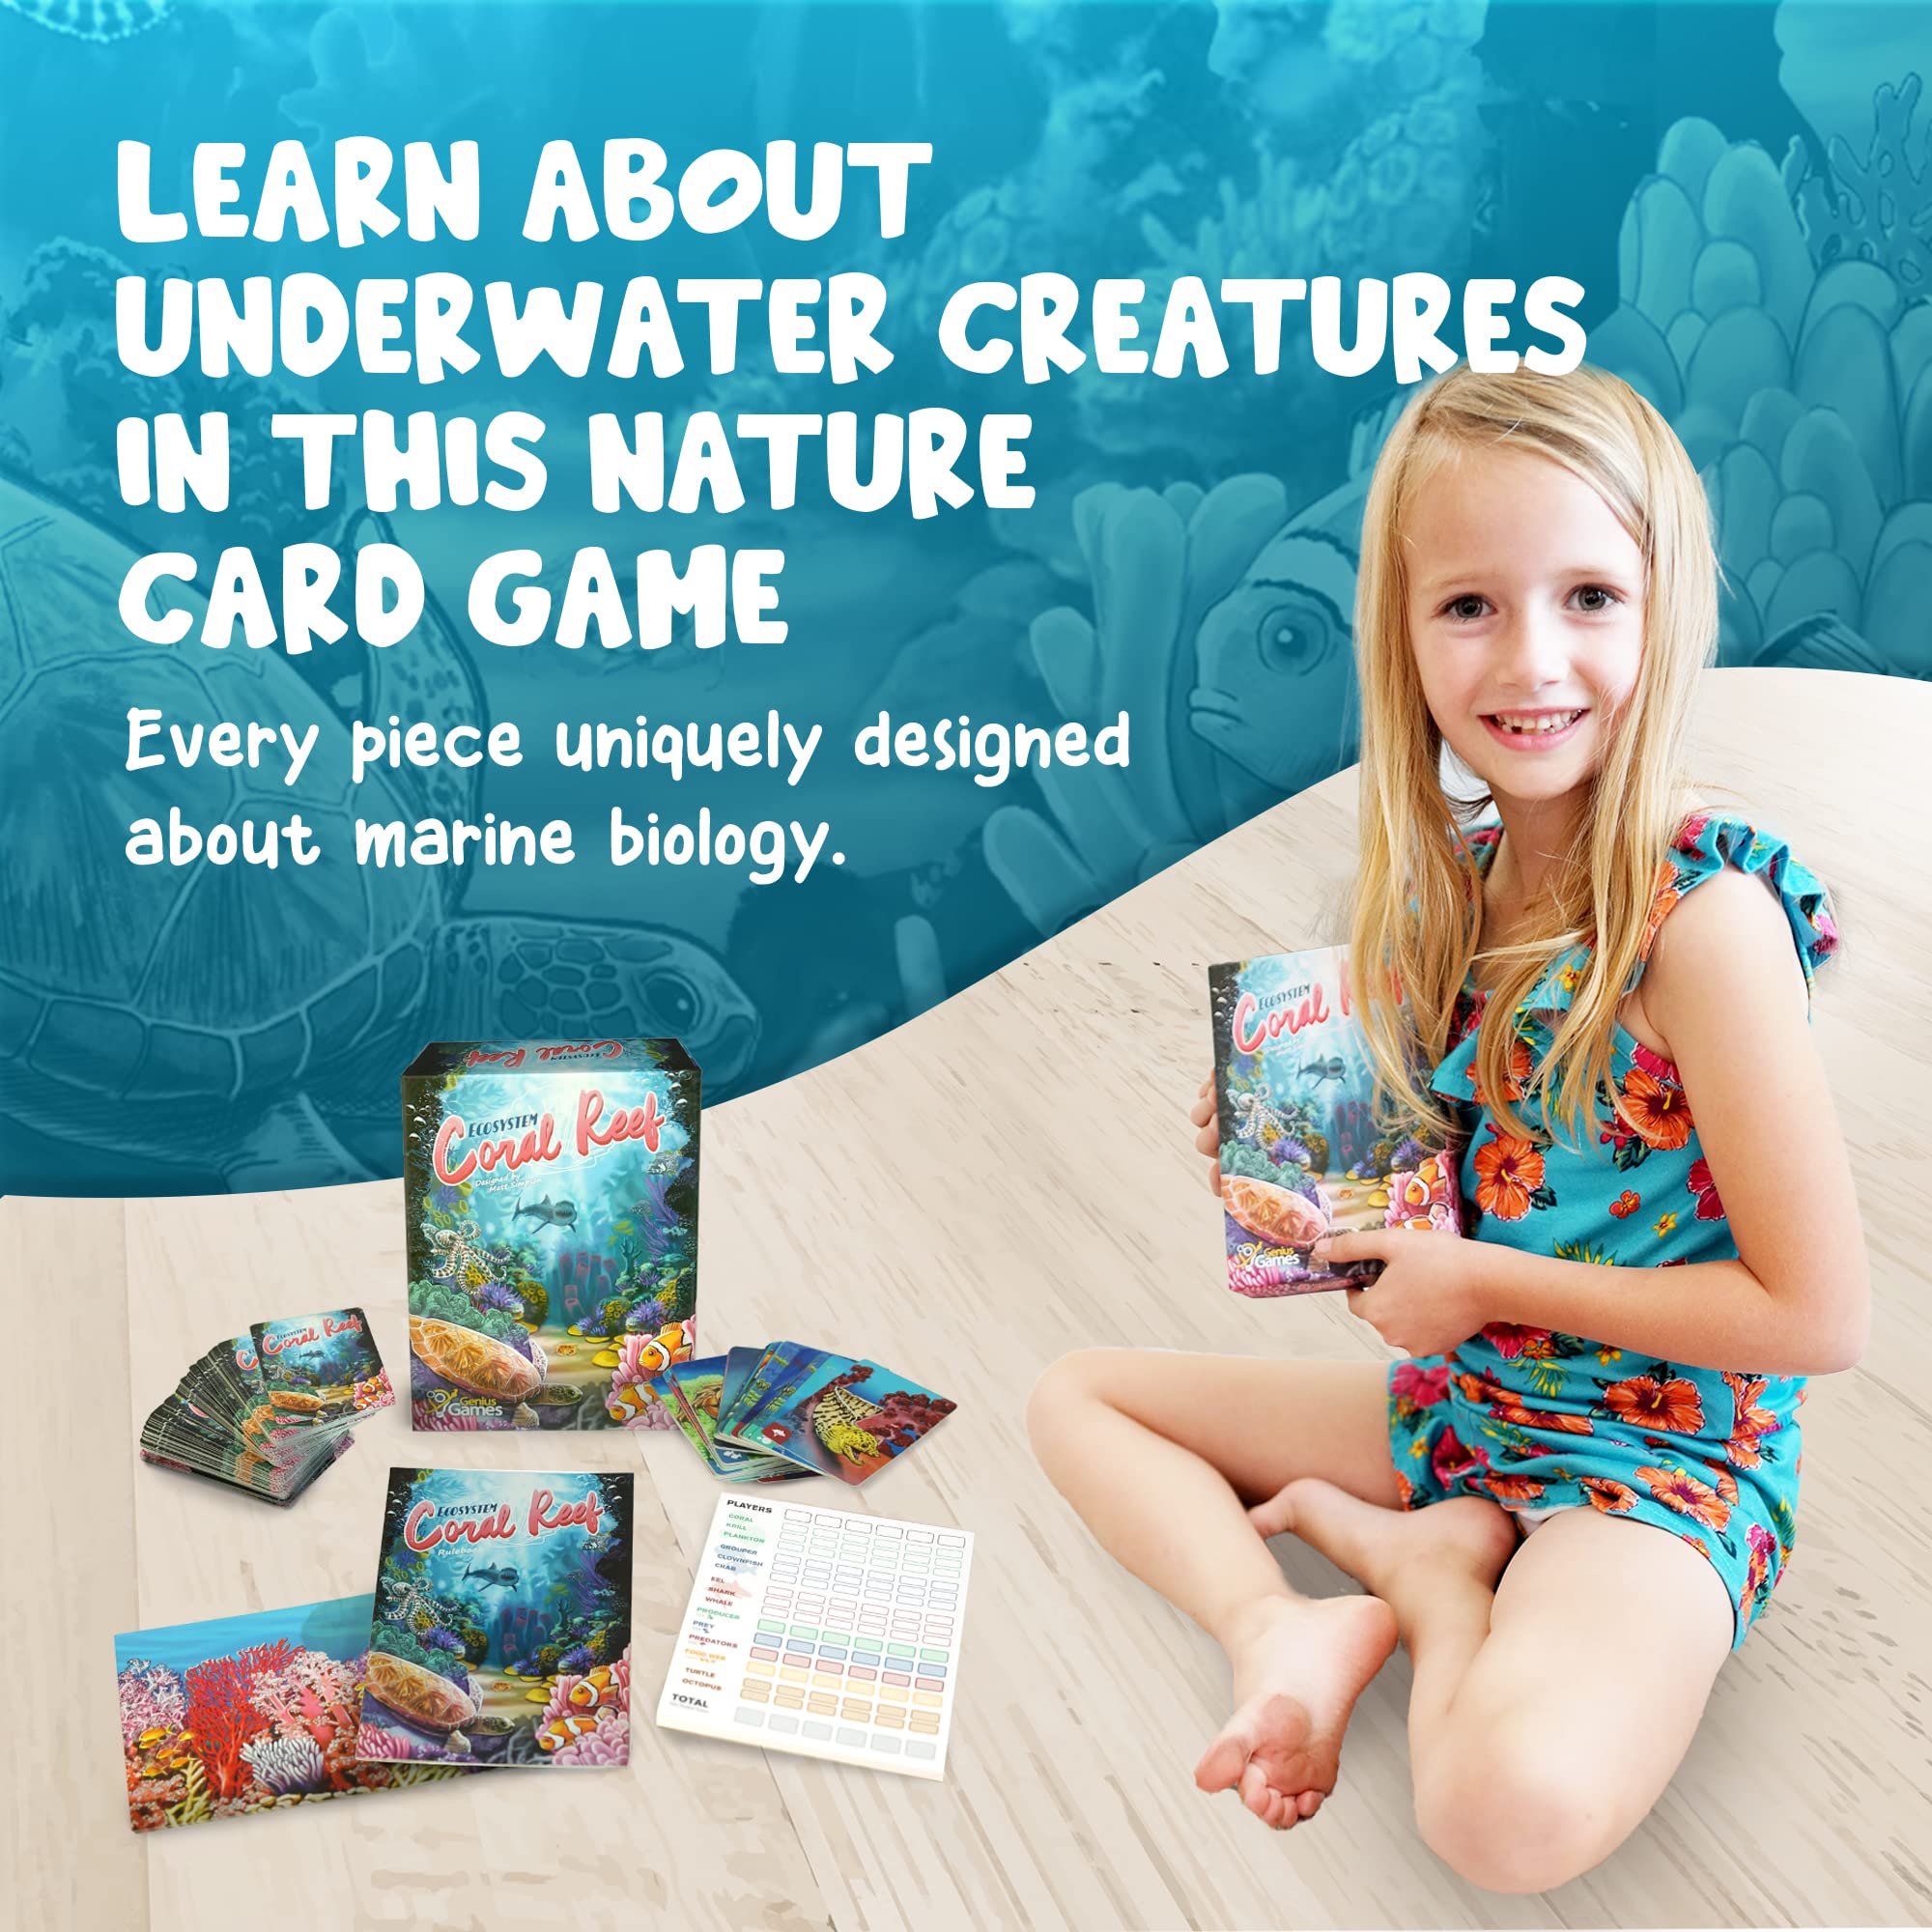 Genius Games Ecosystem: Coral Reef - A Mensa Recommended Family Card Game About Aquatic Animals, Their Habitats & Food Chain | A Light Educational Marine Biology Board Game for Kids and Families